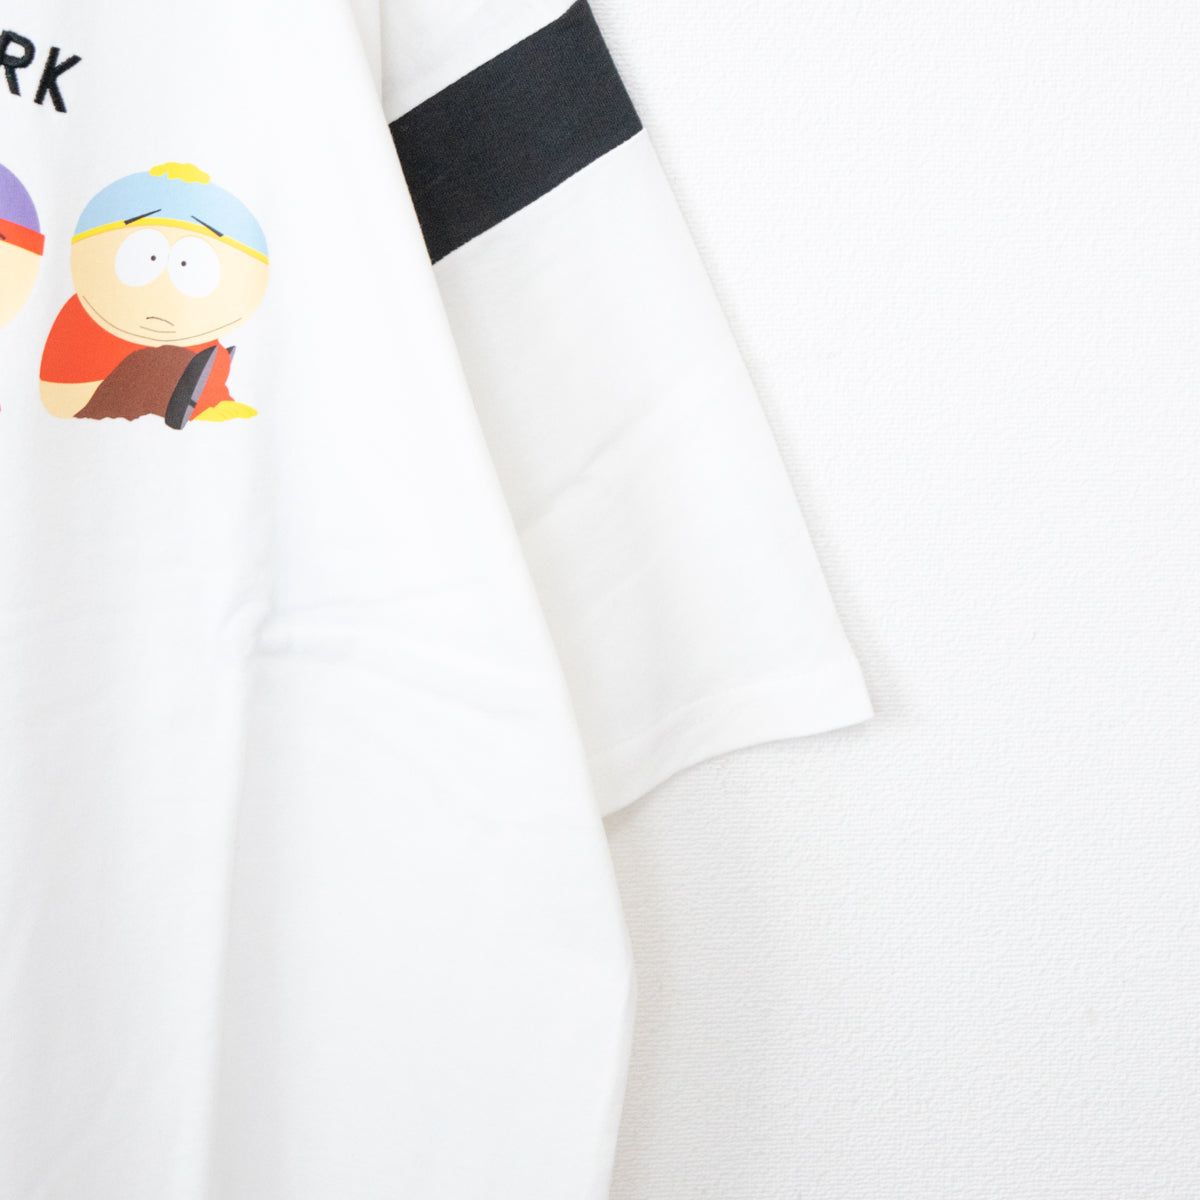 SOUTH PARK Printed Logo Embroidered T-shirt WHITE